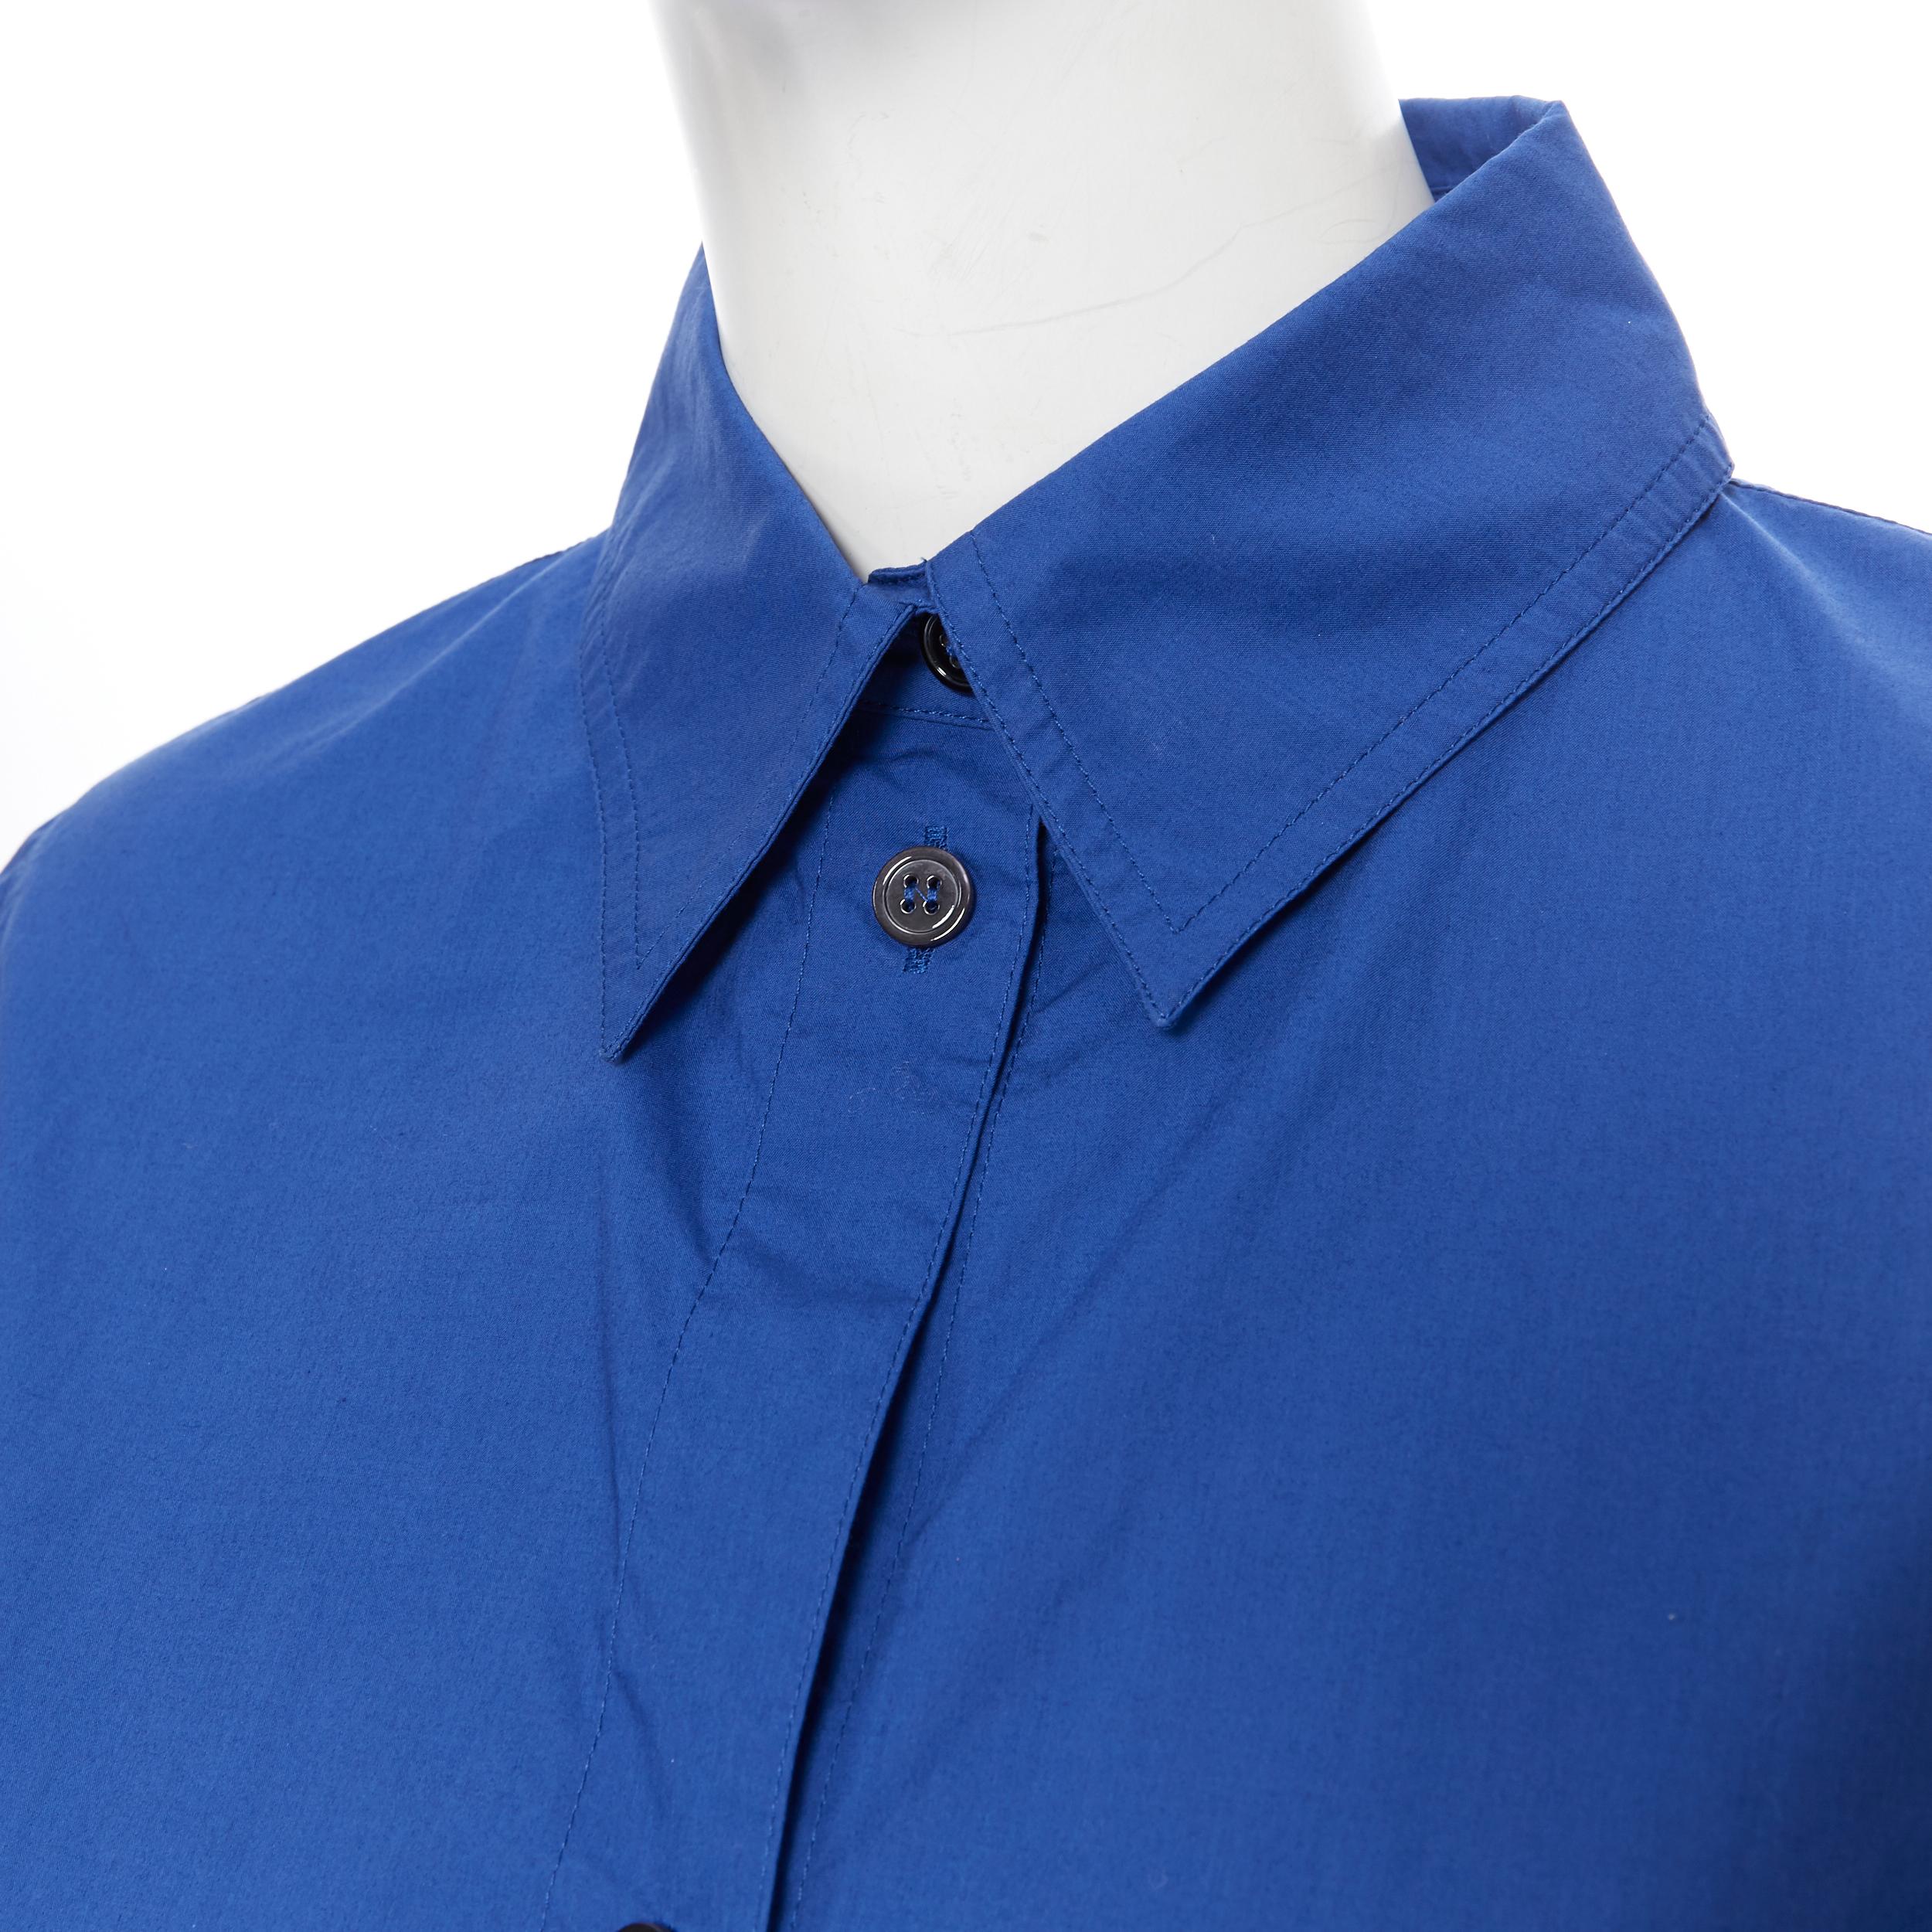 MARNI 100% cotton cases 3/4 sleeves step hem cotton shirt top IT38
Brand: Marni
Model Name / Style: Cotton top
Material: Cotton
Color: Blue
Pattern: Solid
Closure: Button
Extra Detail: 3/4 sleeve. High low step hem.
Made in: Italy

CONDITION: